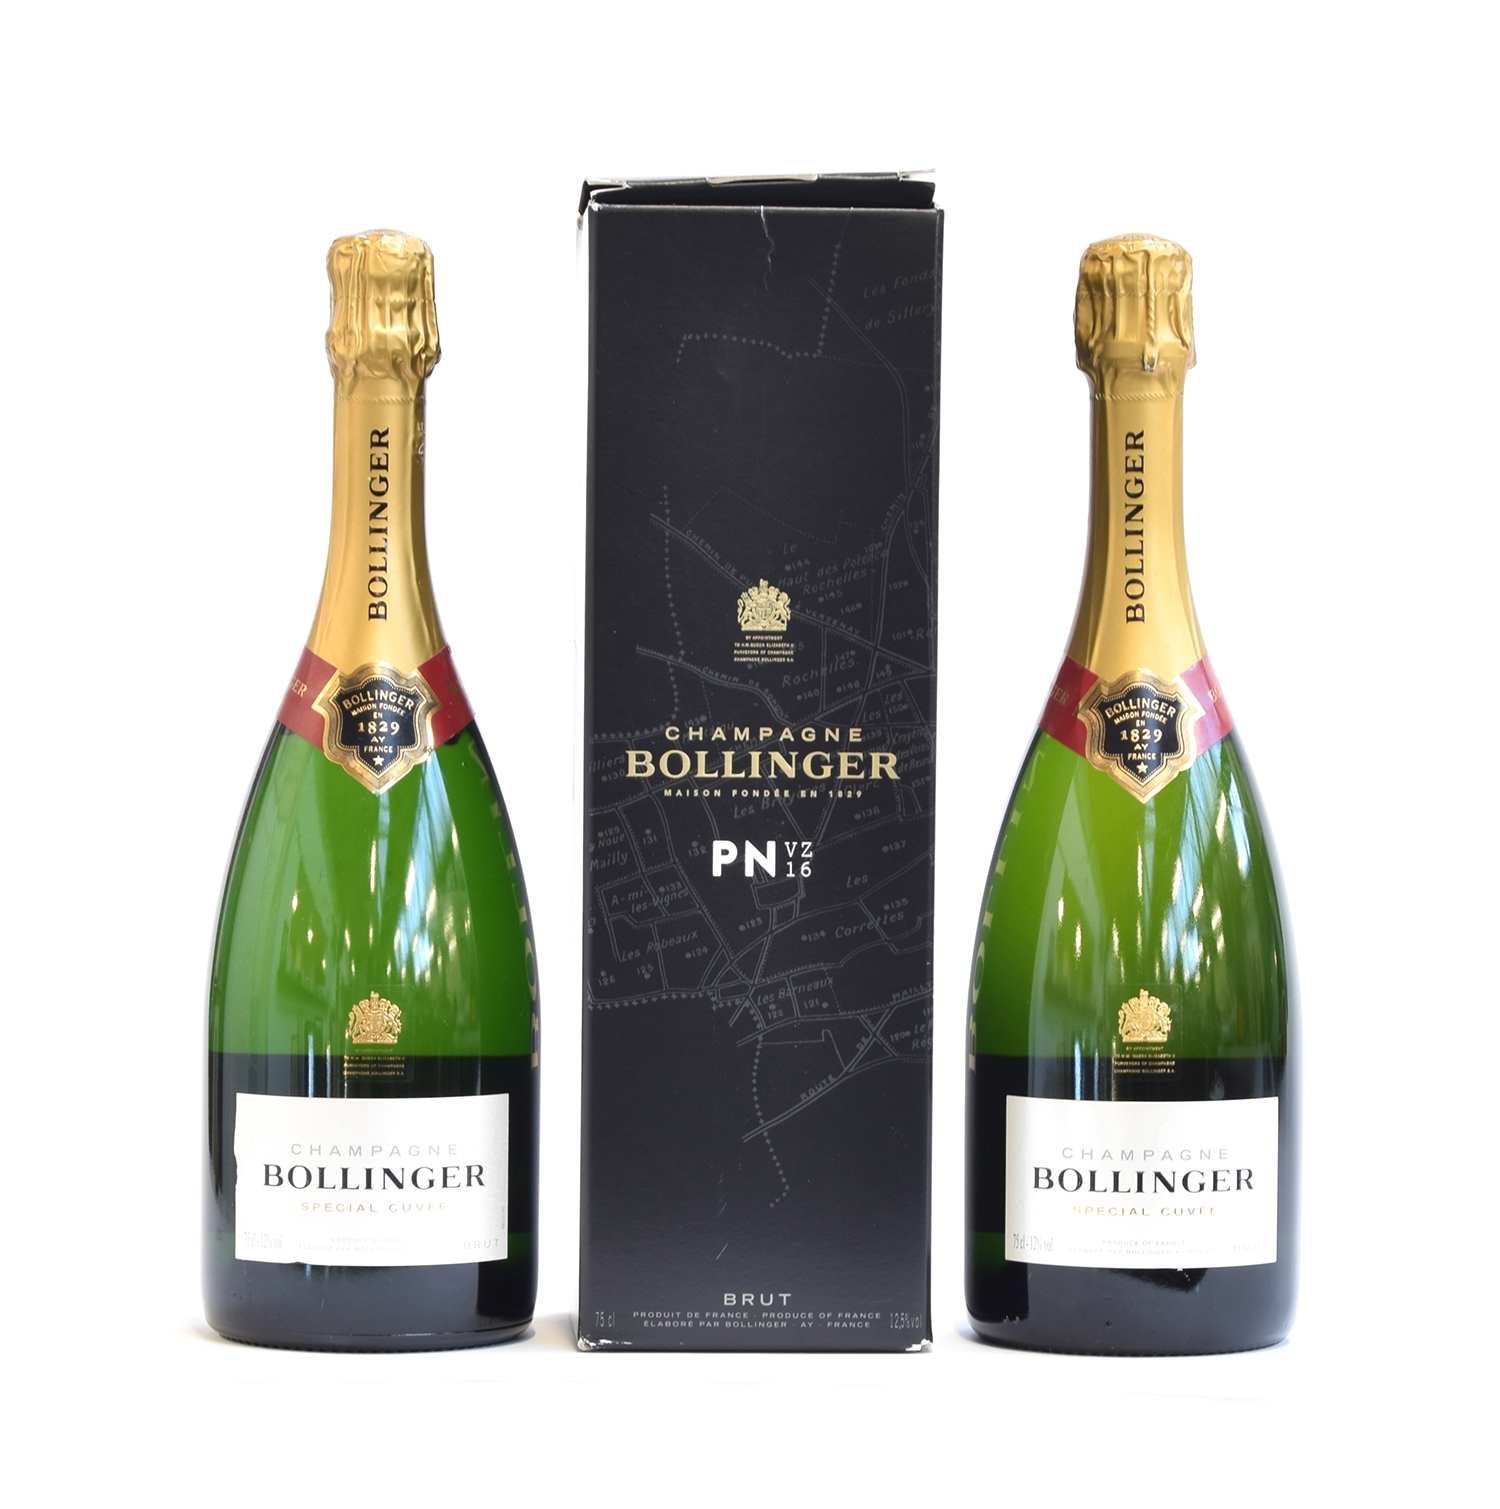 Bollinger PN VS16, boxed (12.5%, 75cl), together with Champagne Bollinger Special Cuveé (12%, 75cl),